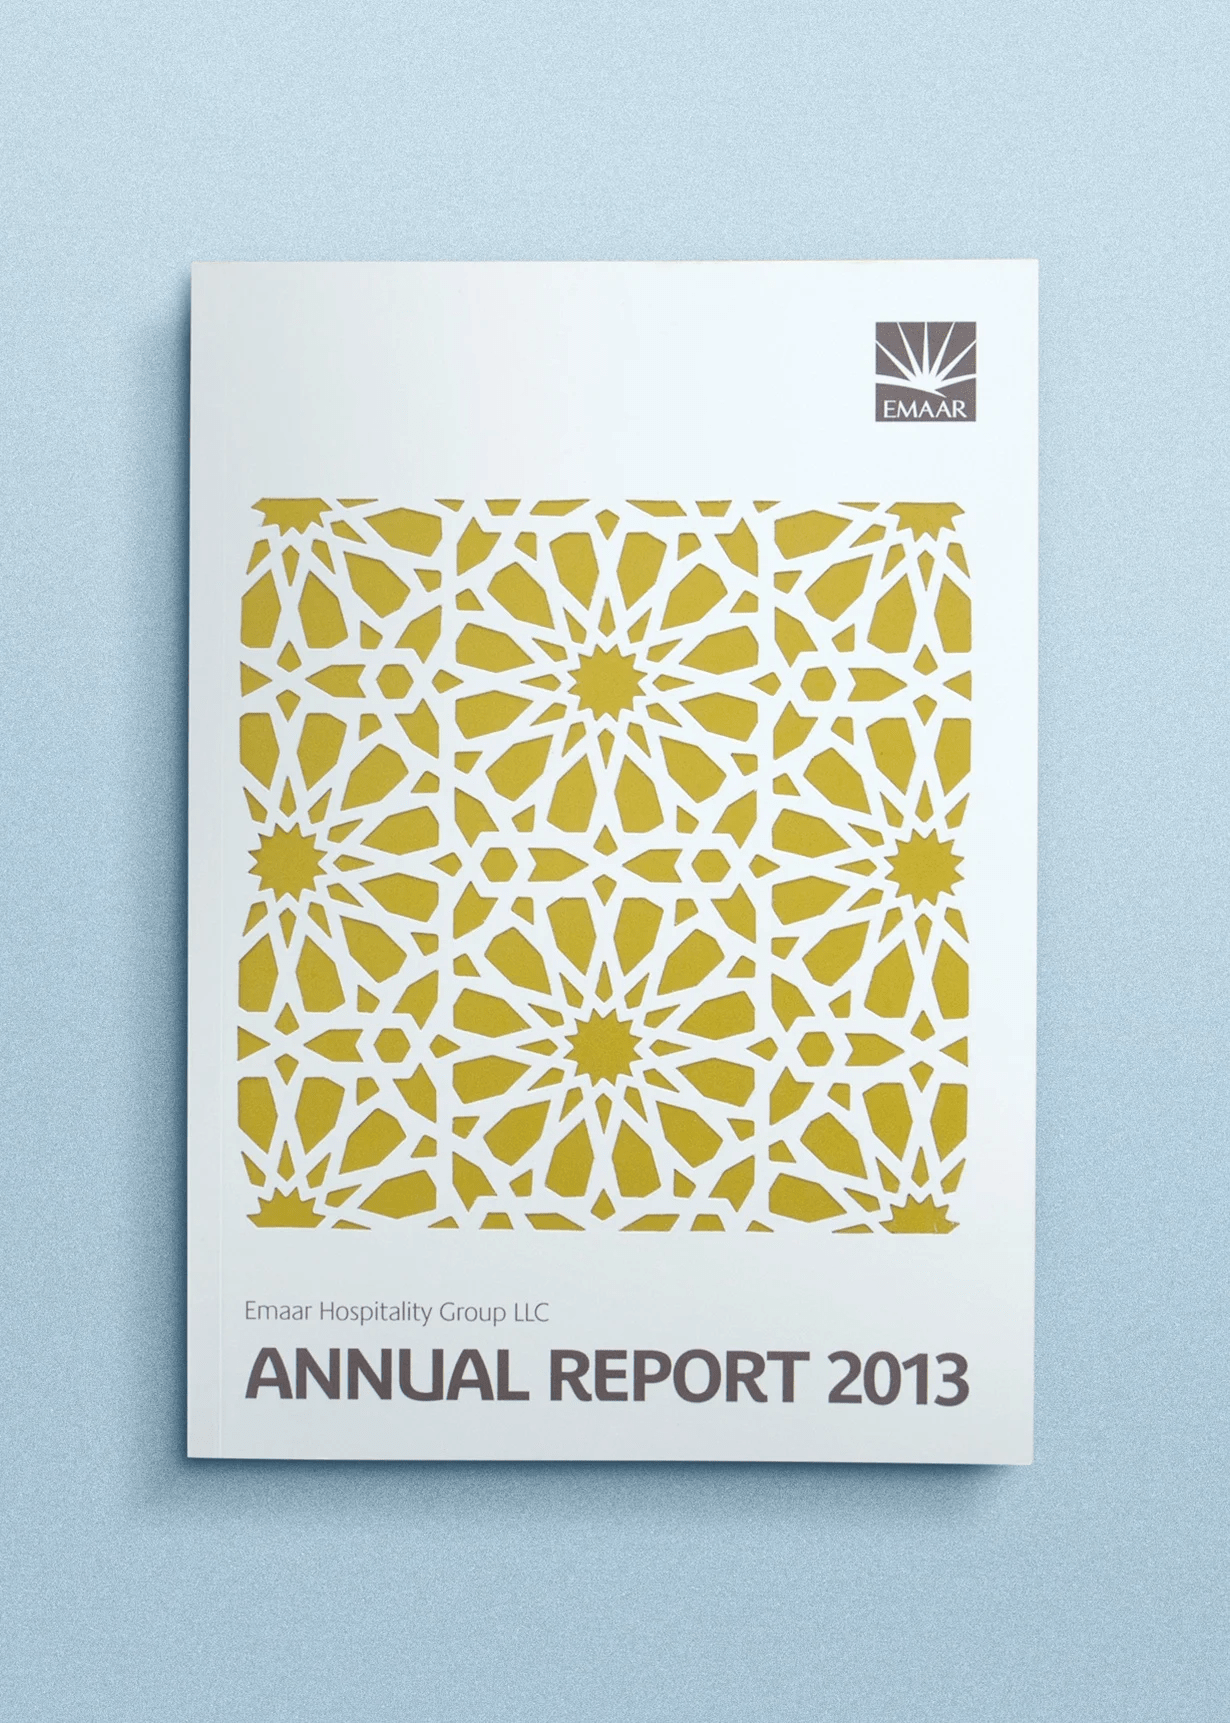 Concept Design and Layout and Copywriting of Emaar Hospitality Group Annual Report 2013 